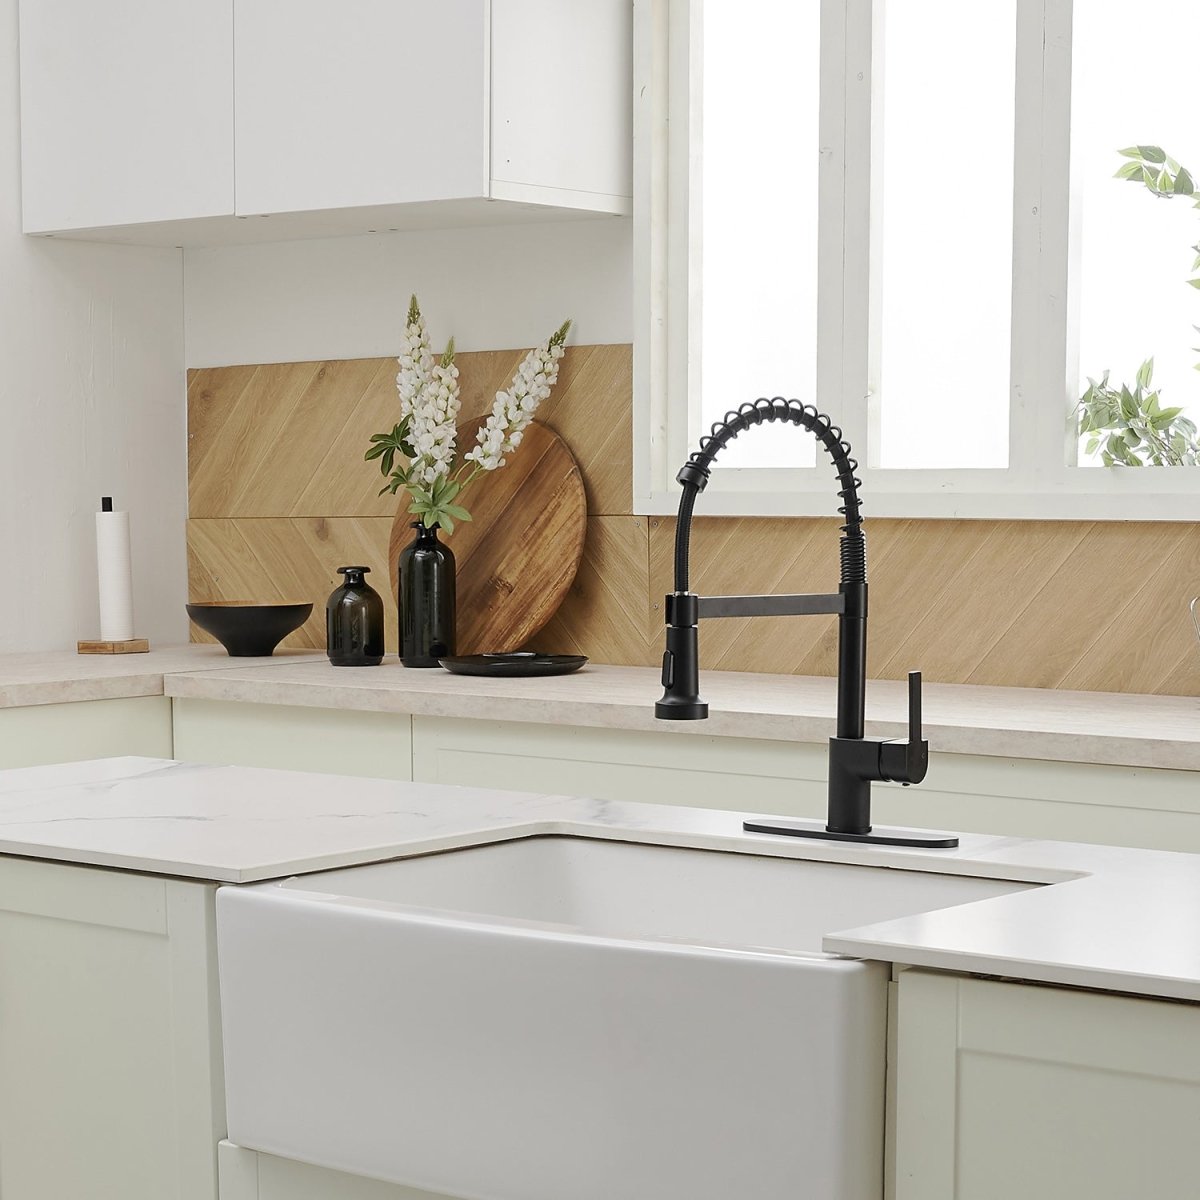 Single Handle Kitchen Sink Faucet with Pull Down Sprayer Black - buyfaucet.com